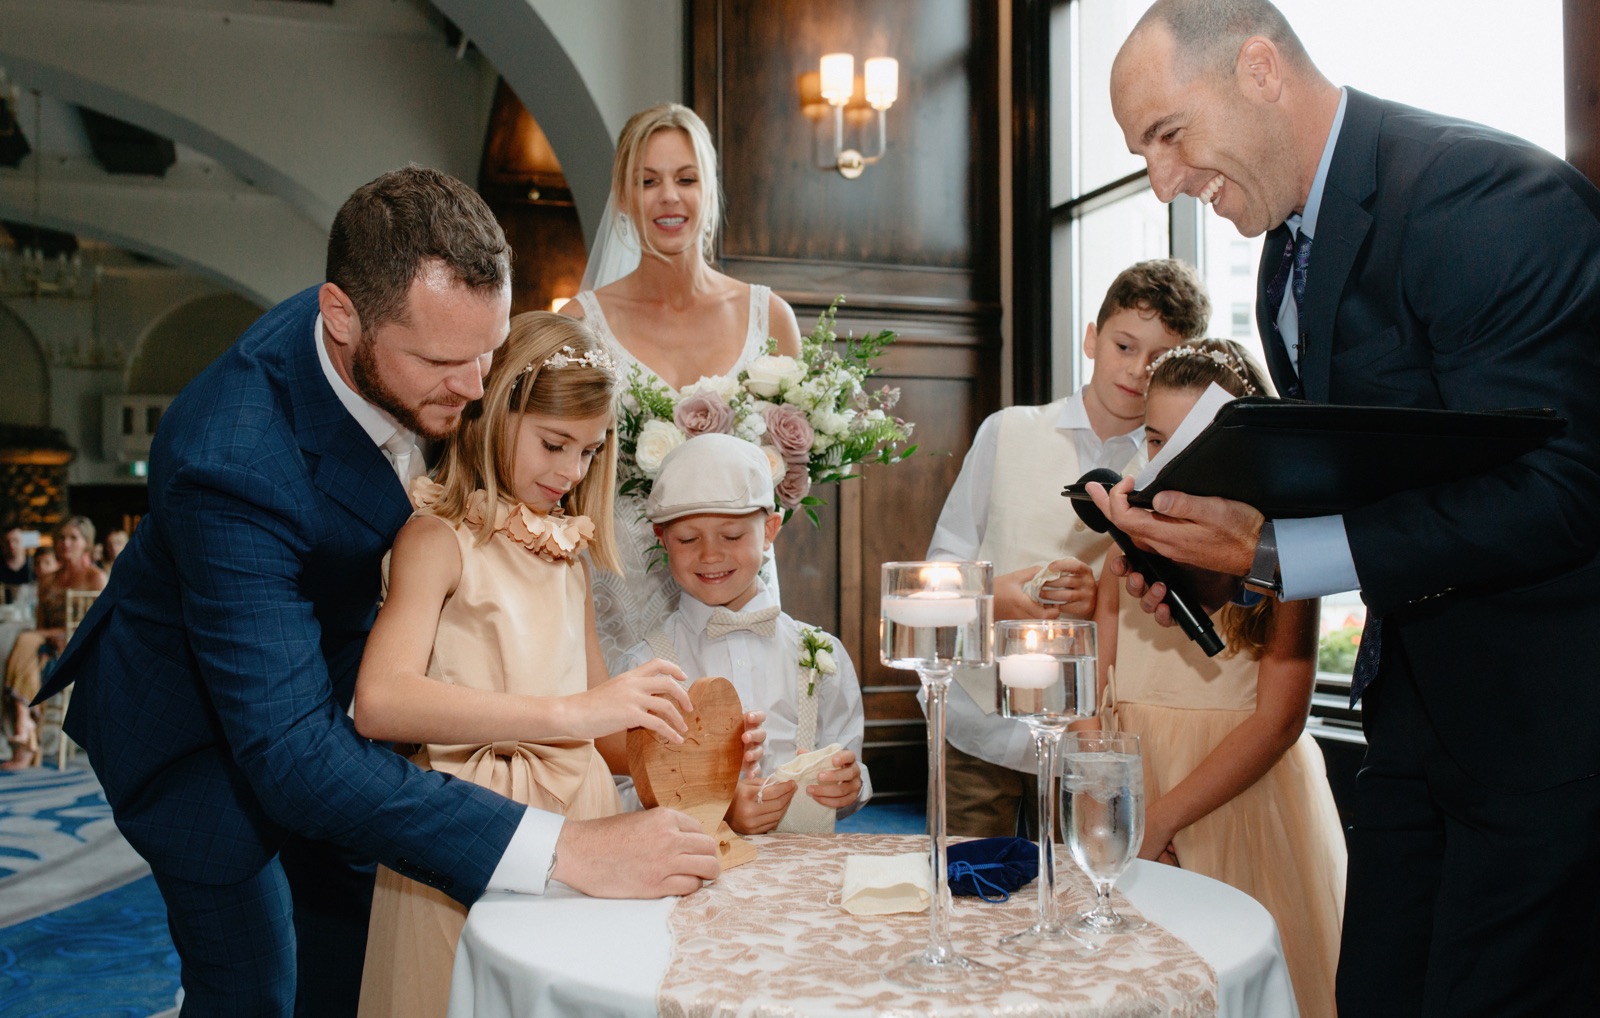 Blended family wedding tradition of arranging wooden heart pieces